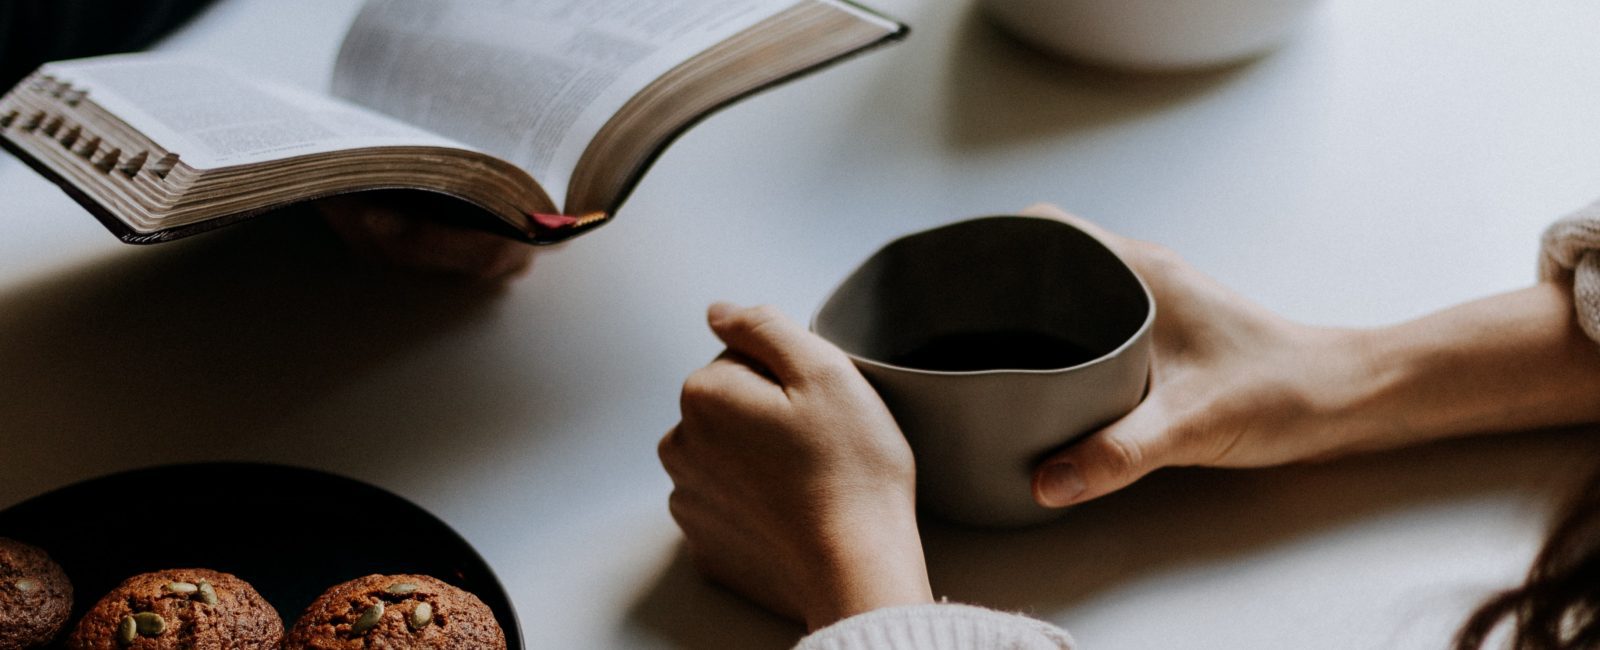 You Really Can Lead a Bible Study: Tips and Resources to Get You Started